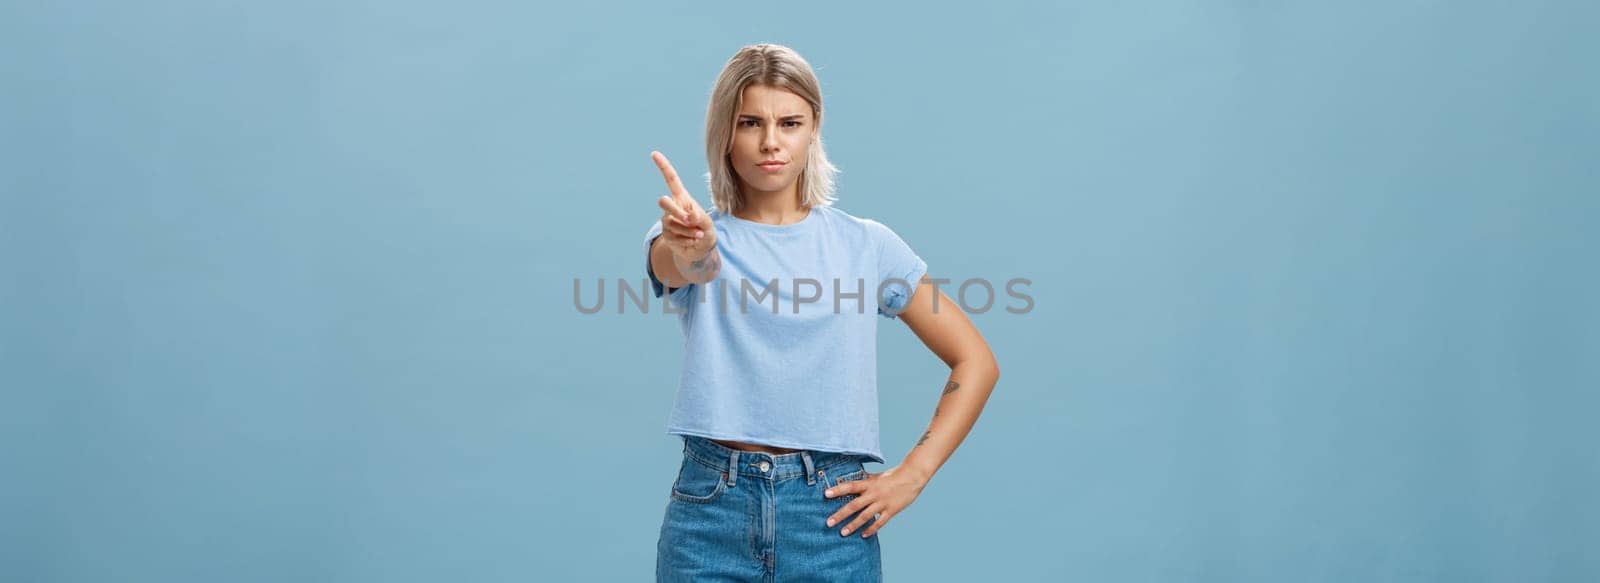 You better not do it. Serious-looking displeased strict elder sister with fair hair and tanned skin frowning holding hand on waist shaking index finger in forbid or stop gesture over blue background.